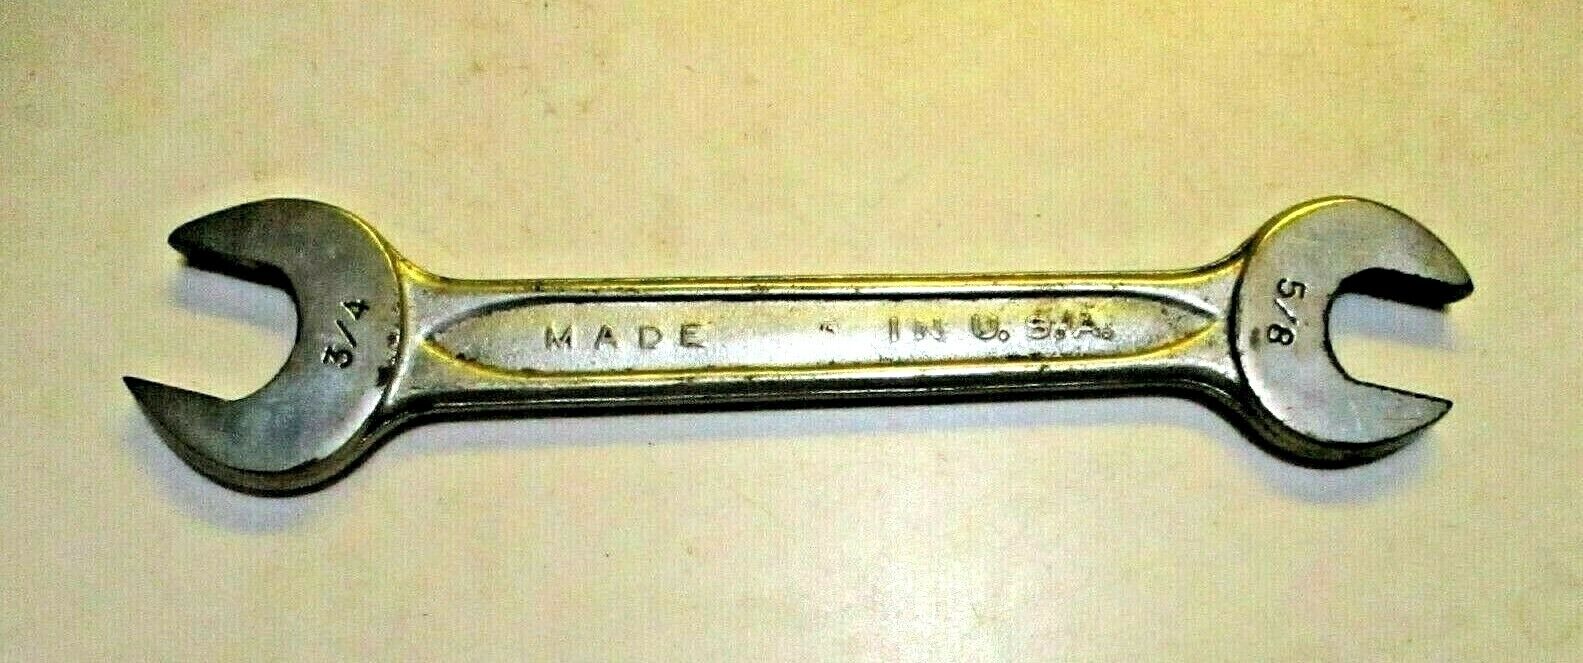 Indestro Drop Forged Select Unbranded USA P729 Open End SAE Wrench 5/8